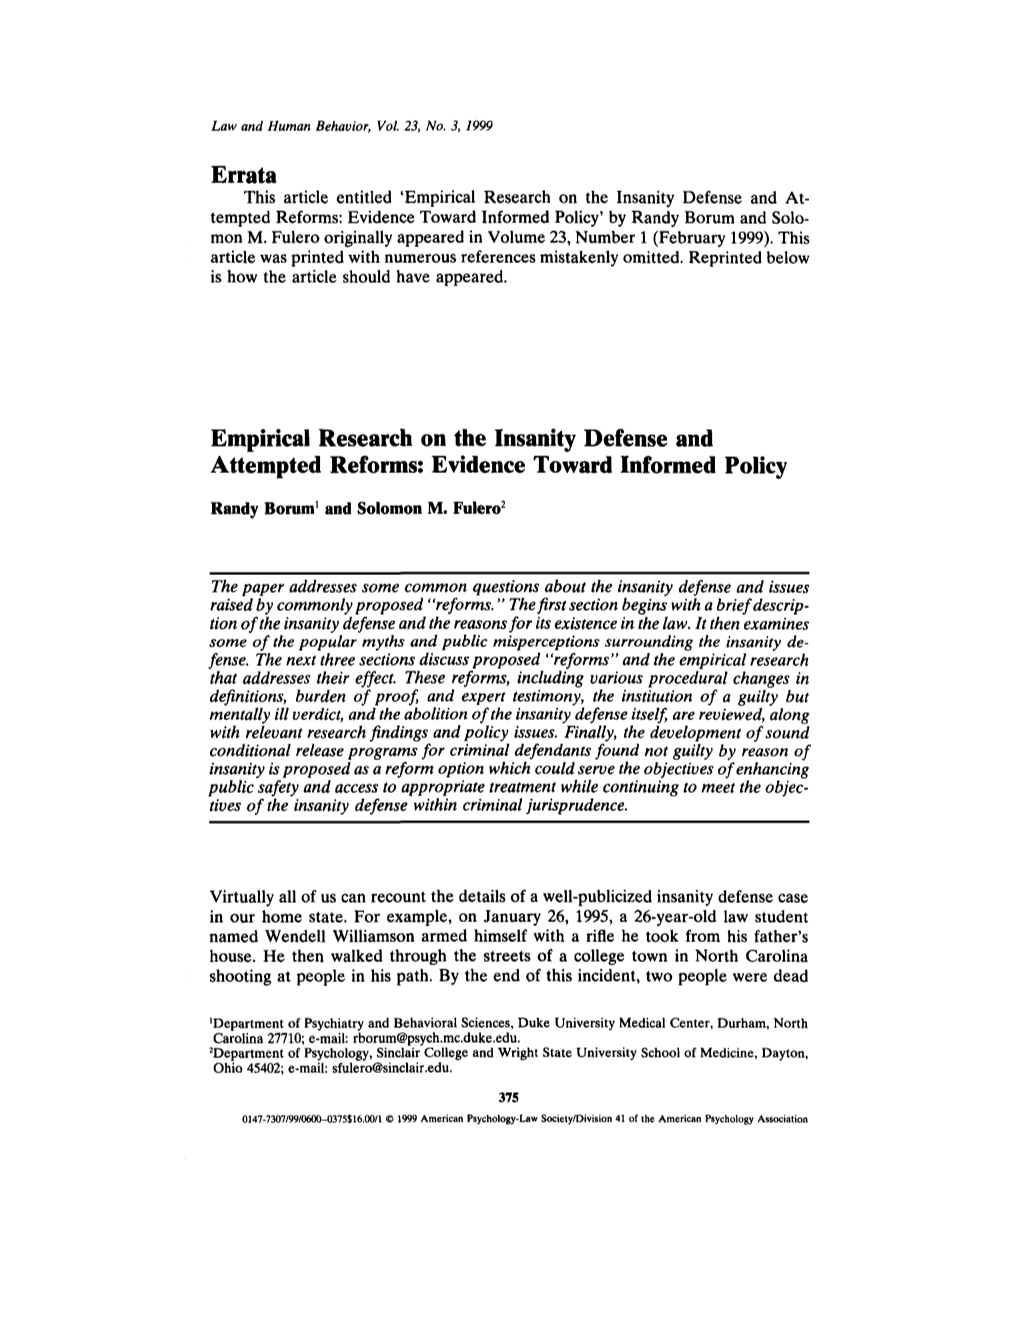 Empirical Research on the Insanity Defense and Attempted Reforms: Evidence Toward Informed Policy